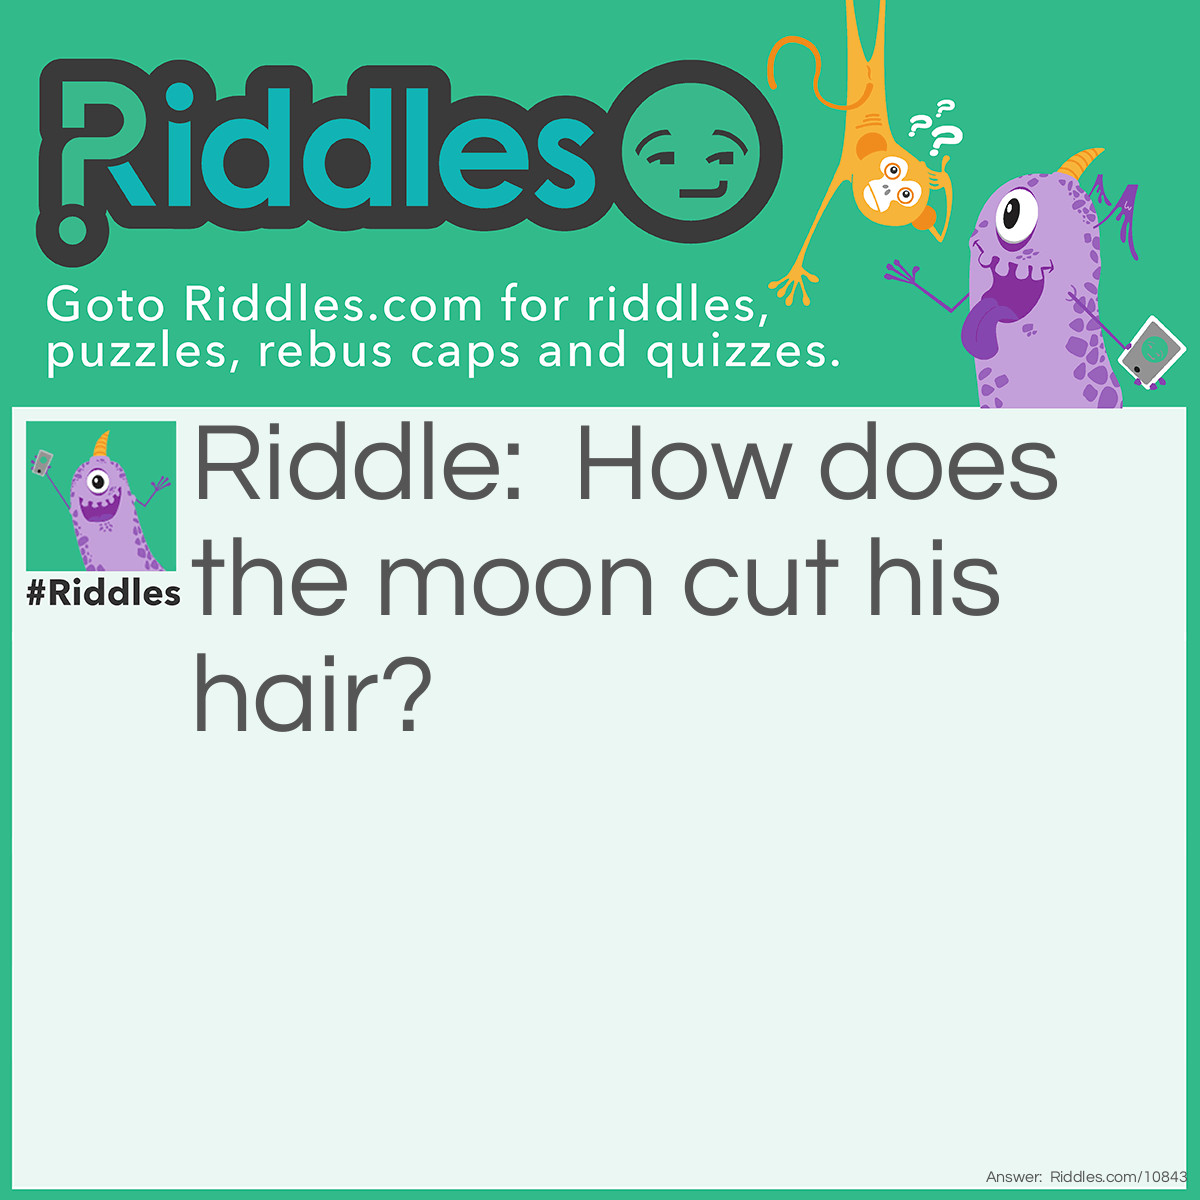 Riddle: How does the moon cut his hair? Answer: He eclipses it.